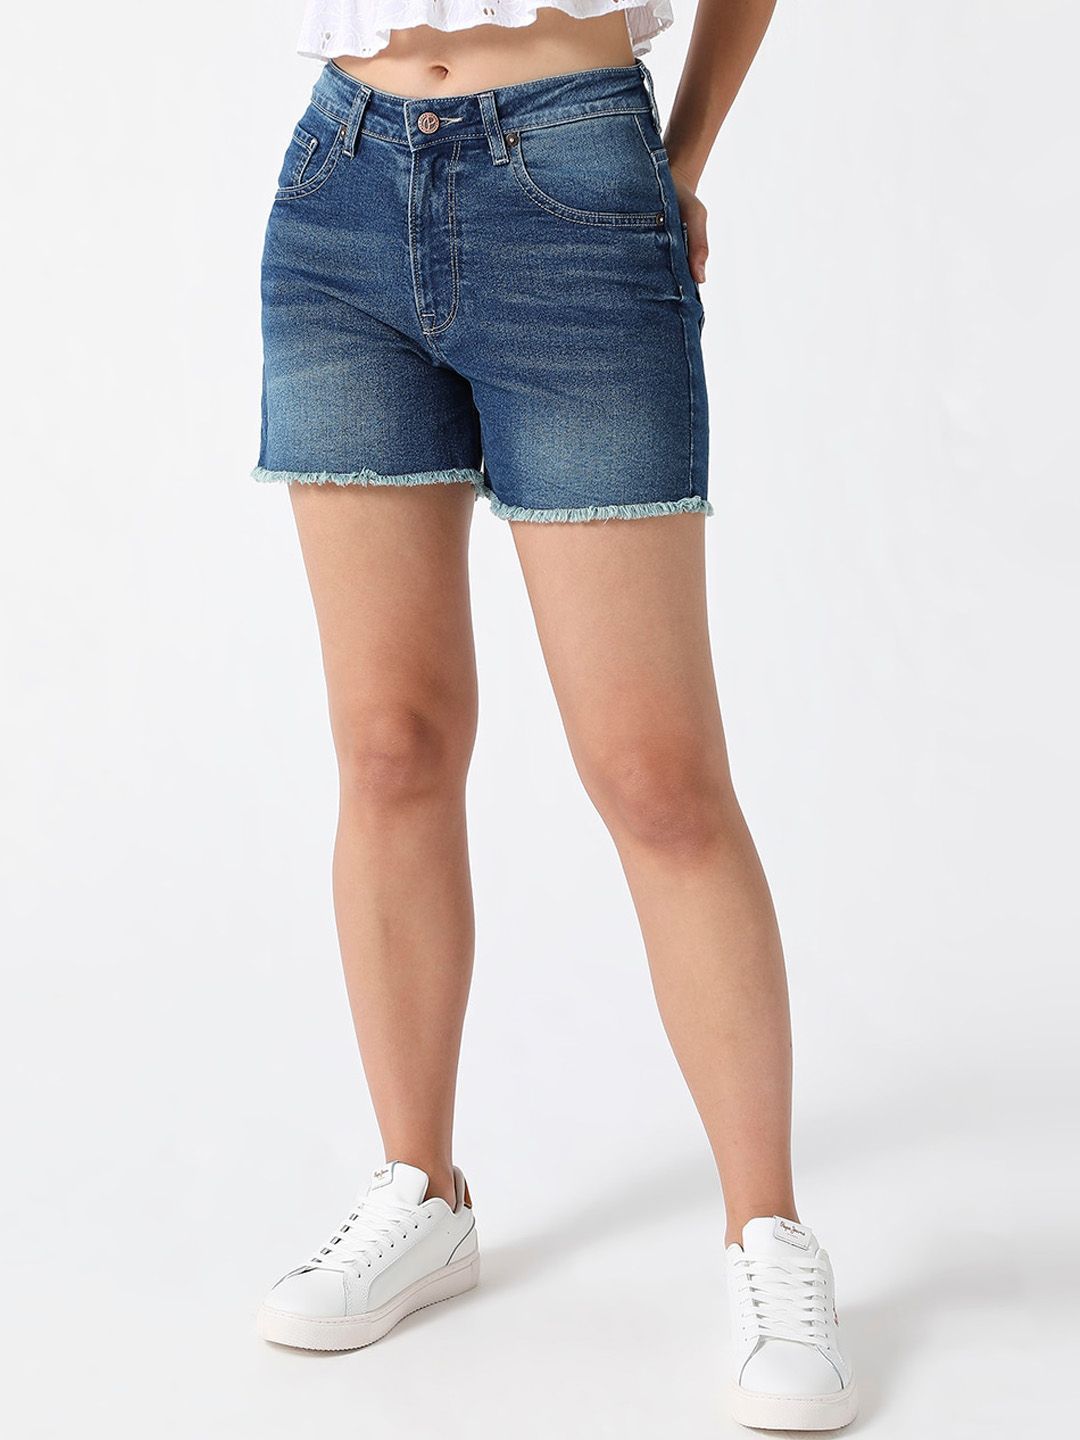 Pepe Jeans Women Washed High-Rise Denim Shorts Price in India